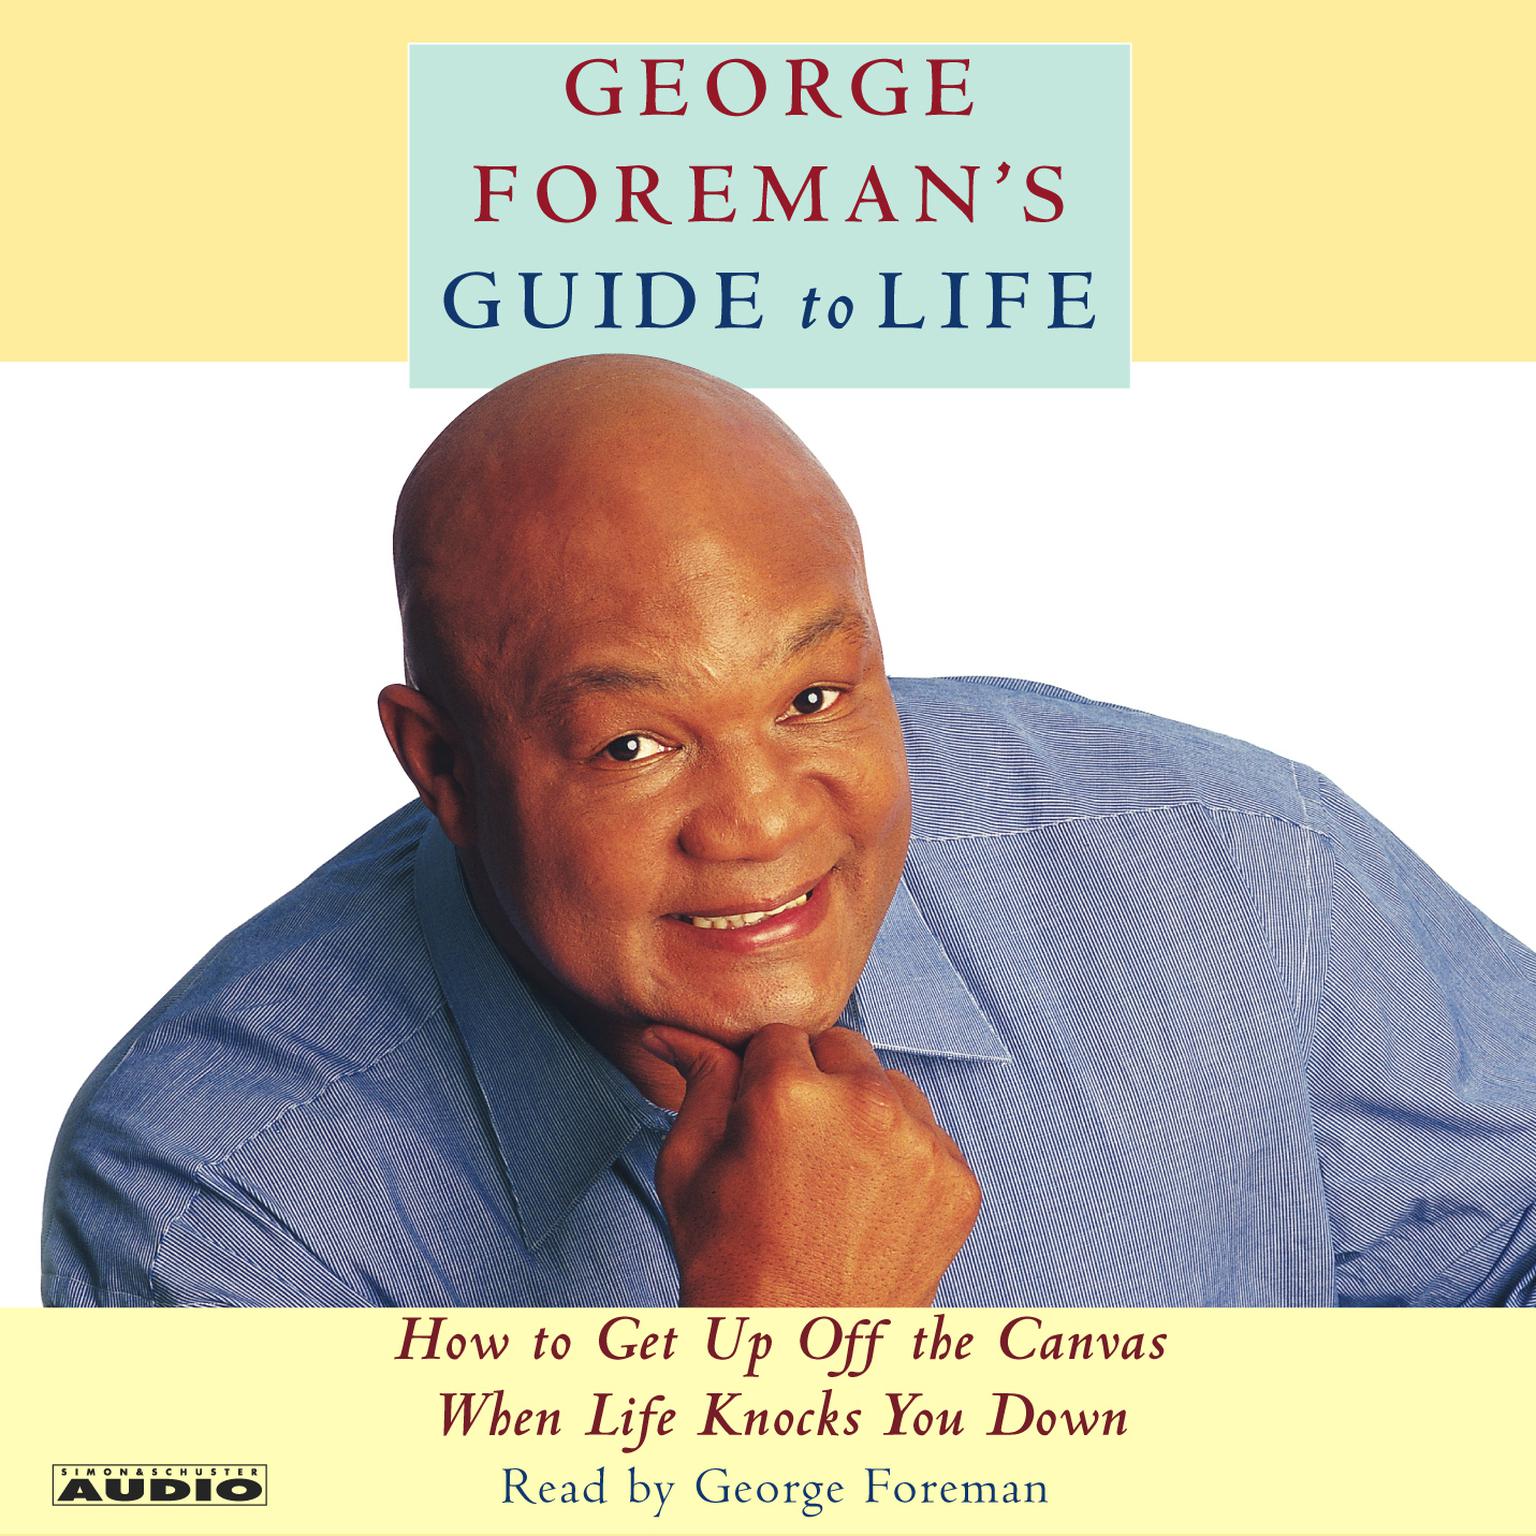 George Foremans Guide to Life (Abridged): How to Get Up Off the Canvas When Life Knocks You Down Audiobook, by George Foreman